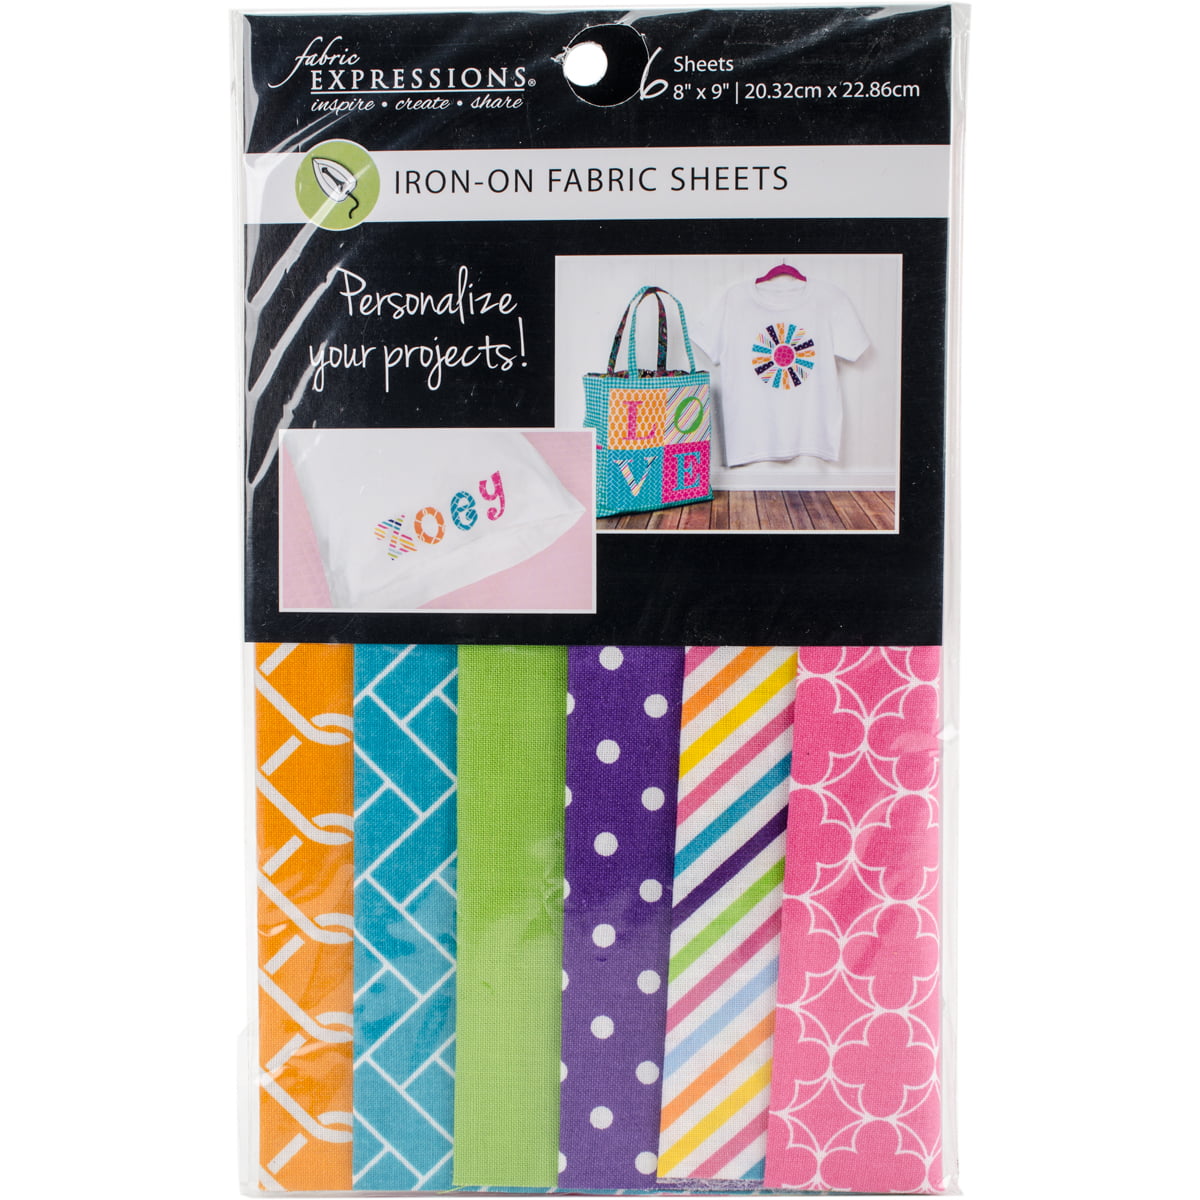 Fabric Expressions Fusible Sheets 8x9 6/Pkg-Woodland Nights